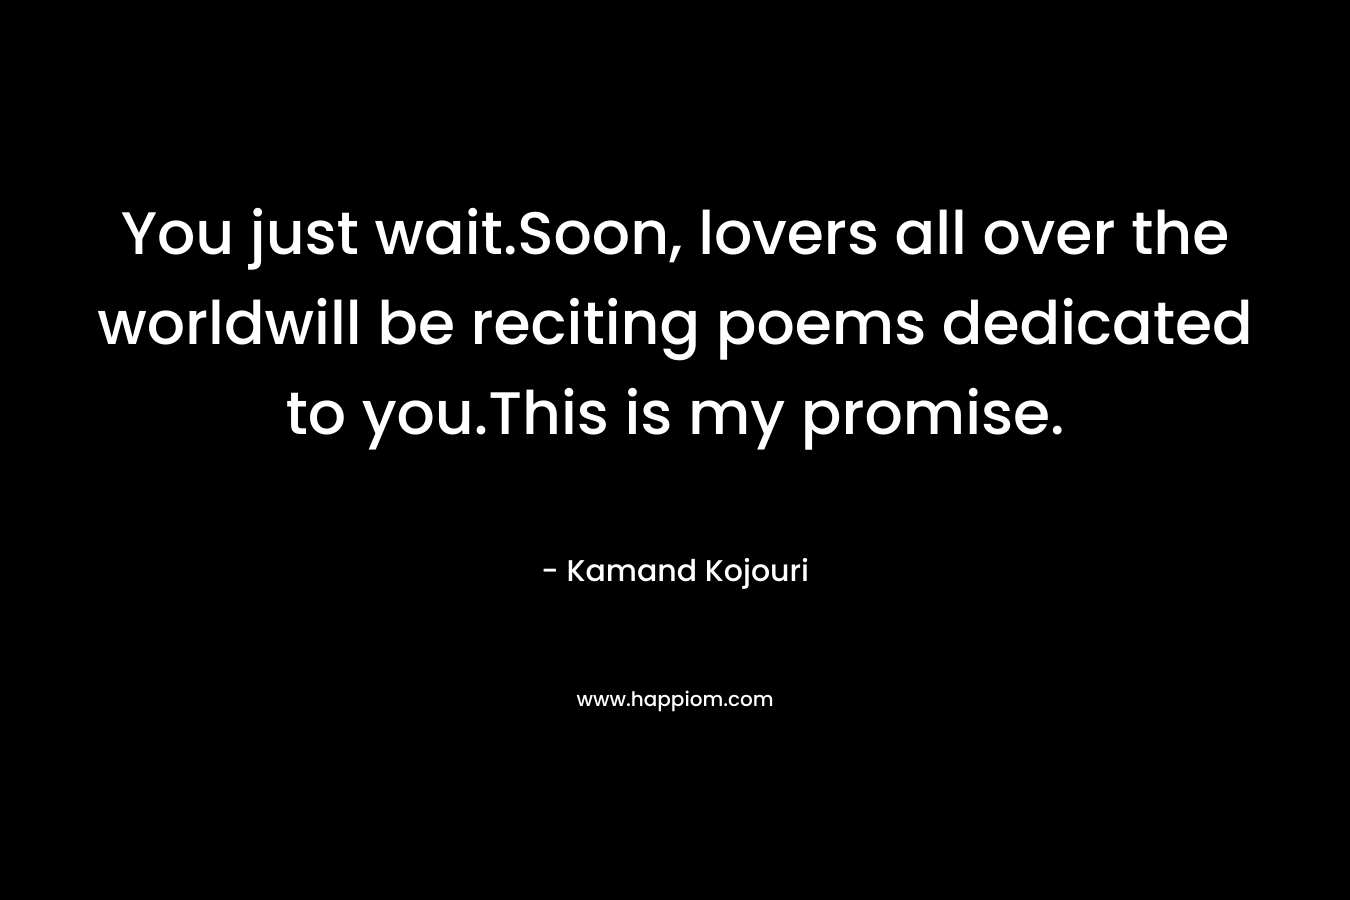 You just wait.Soon, lovers all over the worldwill be reciting poems dedicated to you.This is my promise.